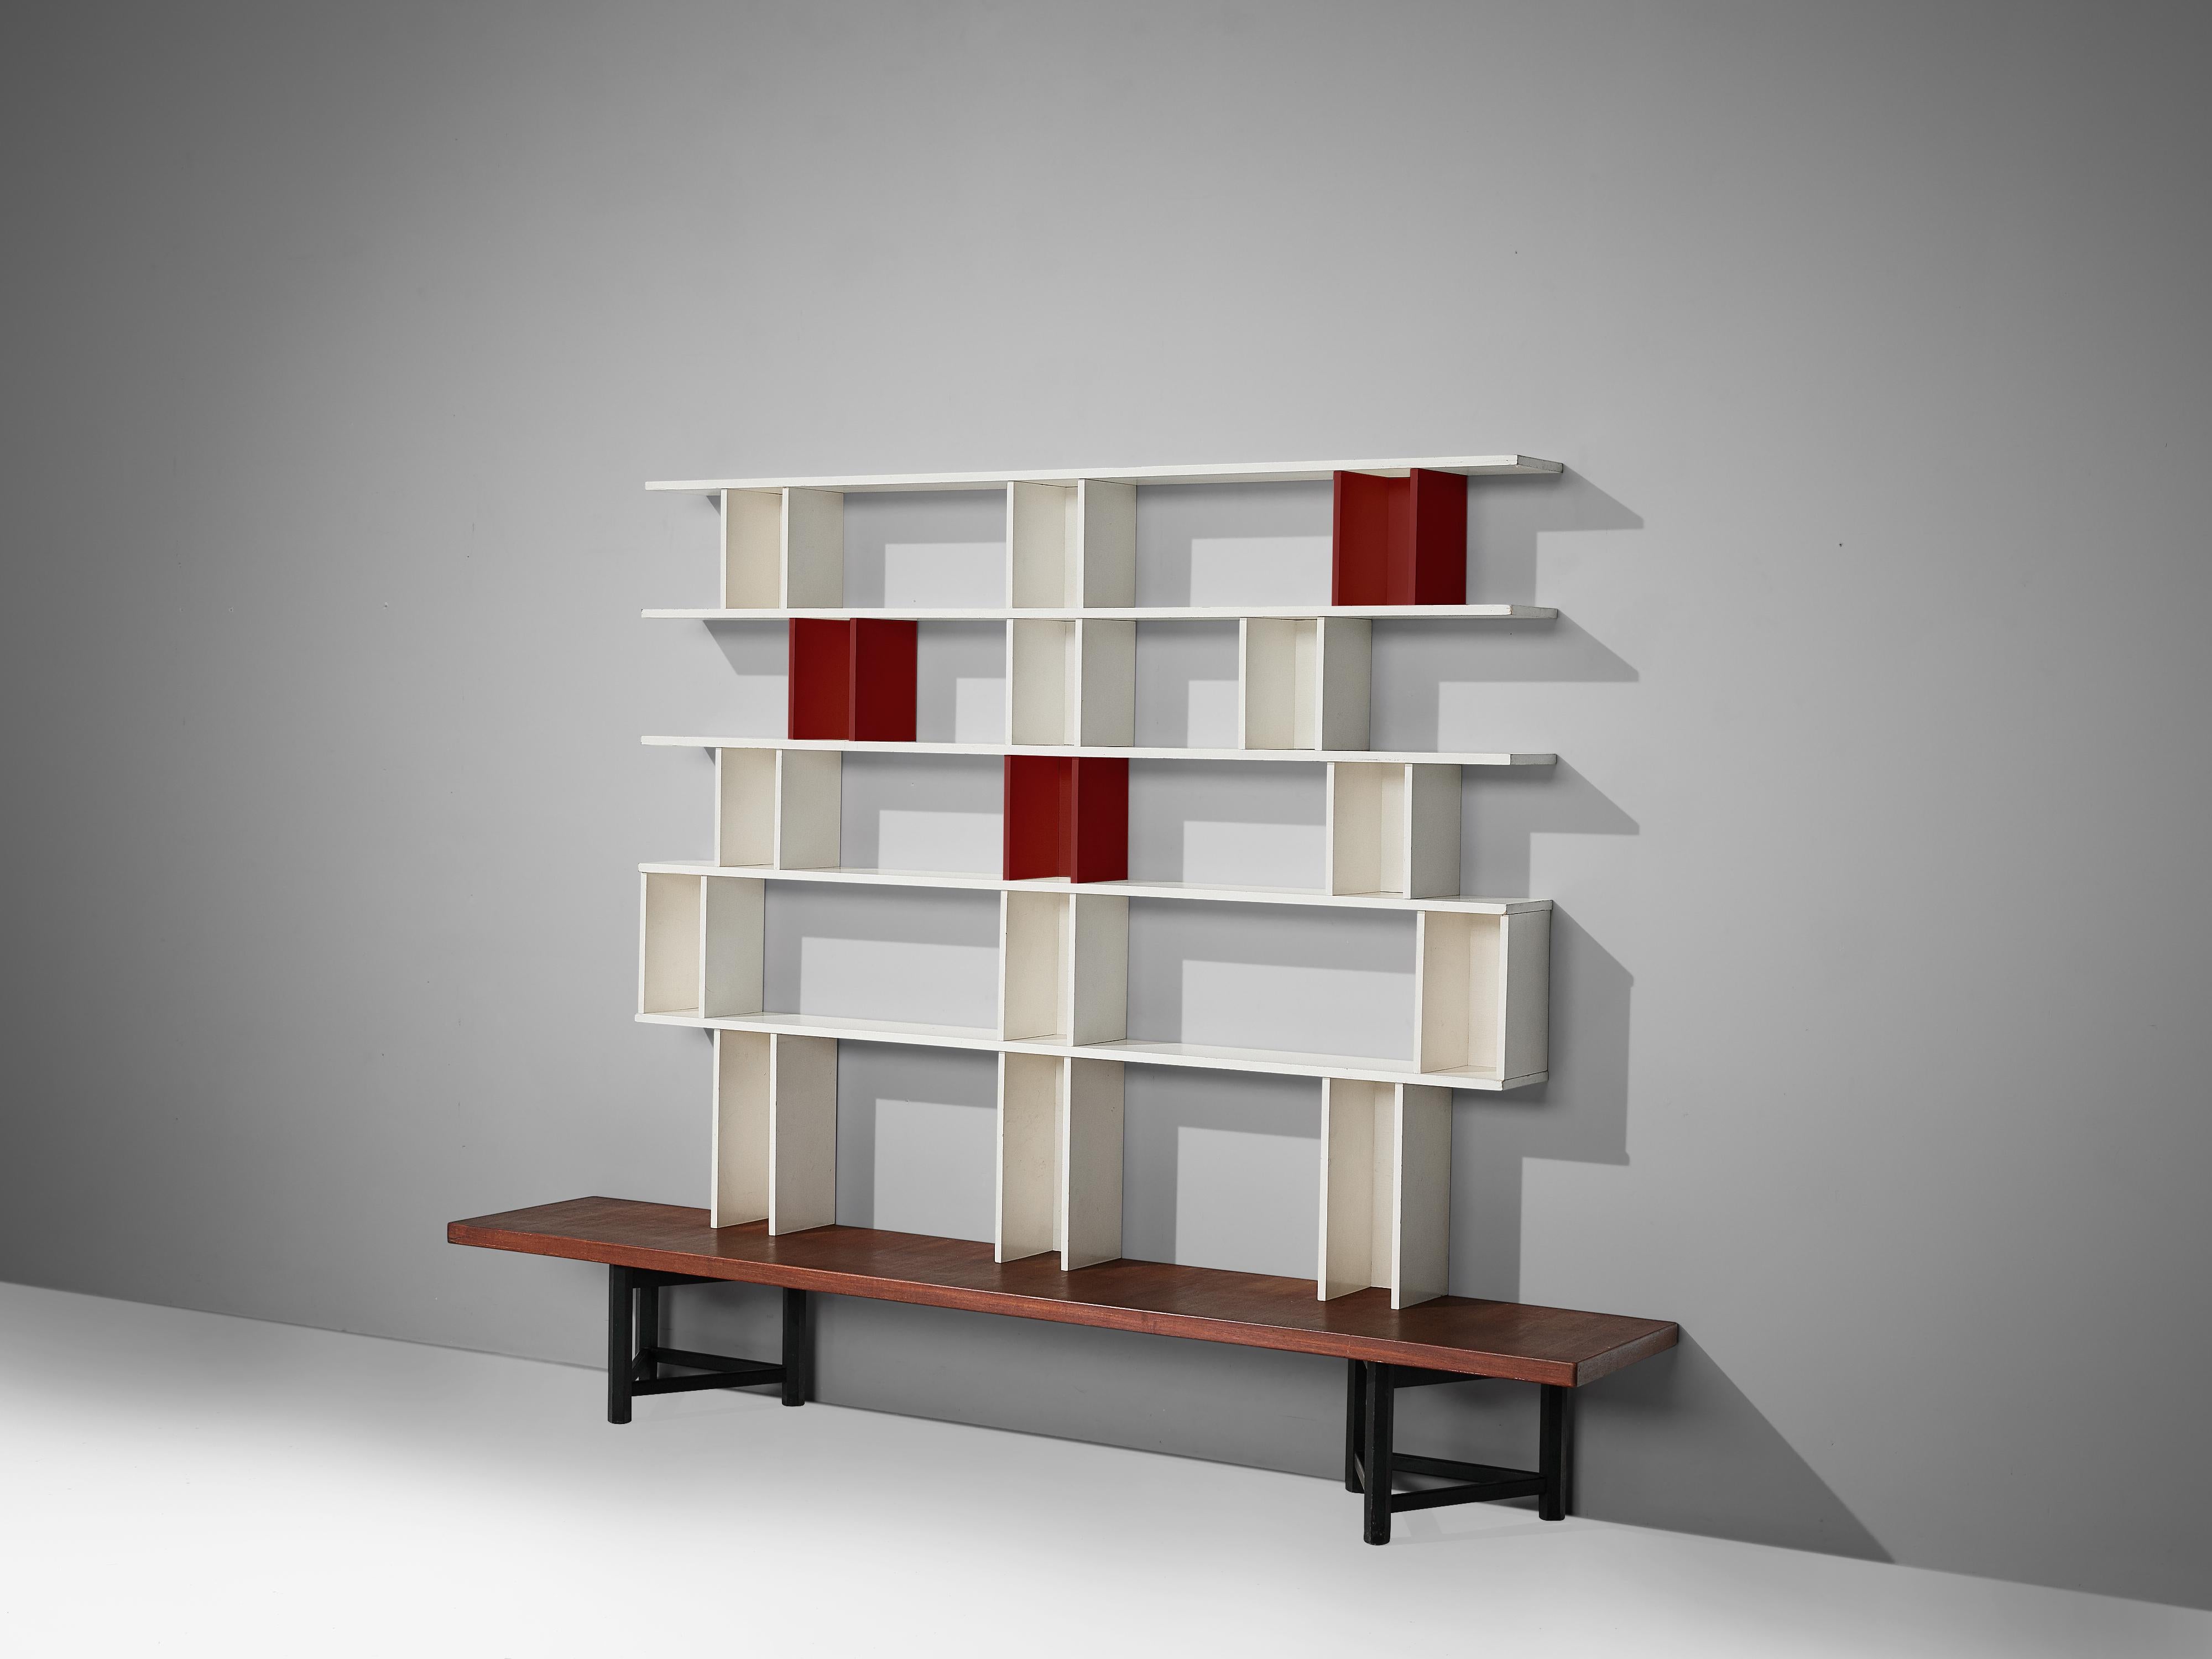 Carl Gustaf Hiort af Ornäs fot Huonekalu Mikko Nupponen, 'Välipala' bookcase, teak, wood, Finland, 1950s.

This bookcase is designed by the Finnish designer Carl Gustaf Hiort. The bookcase is built of several wooden elements in different colors,